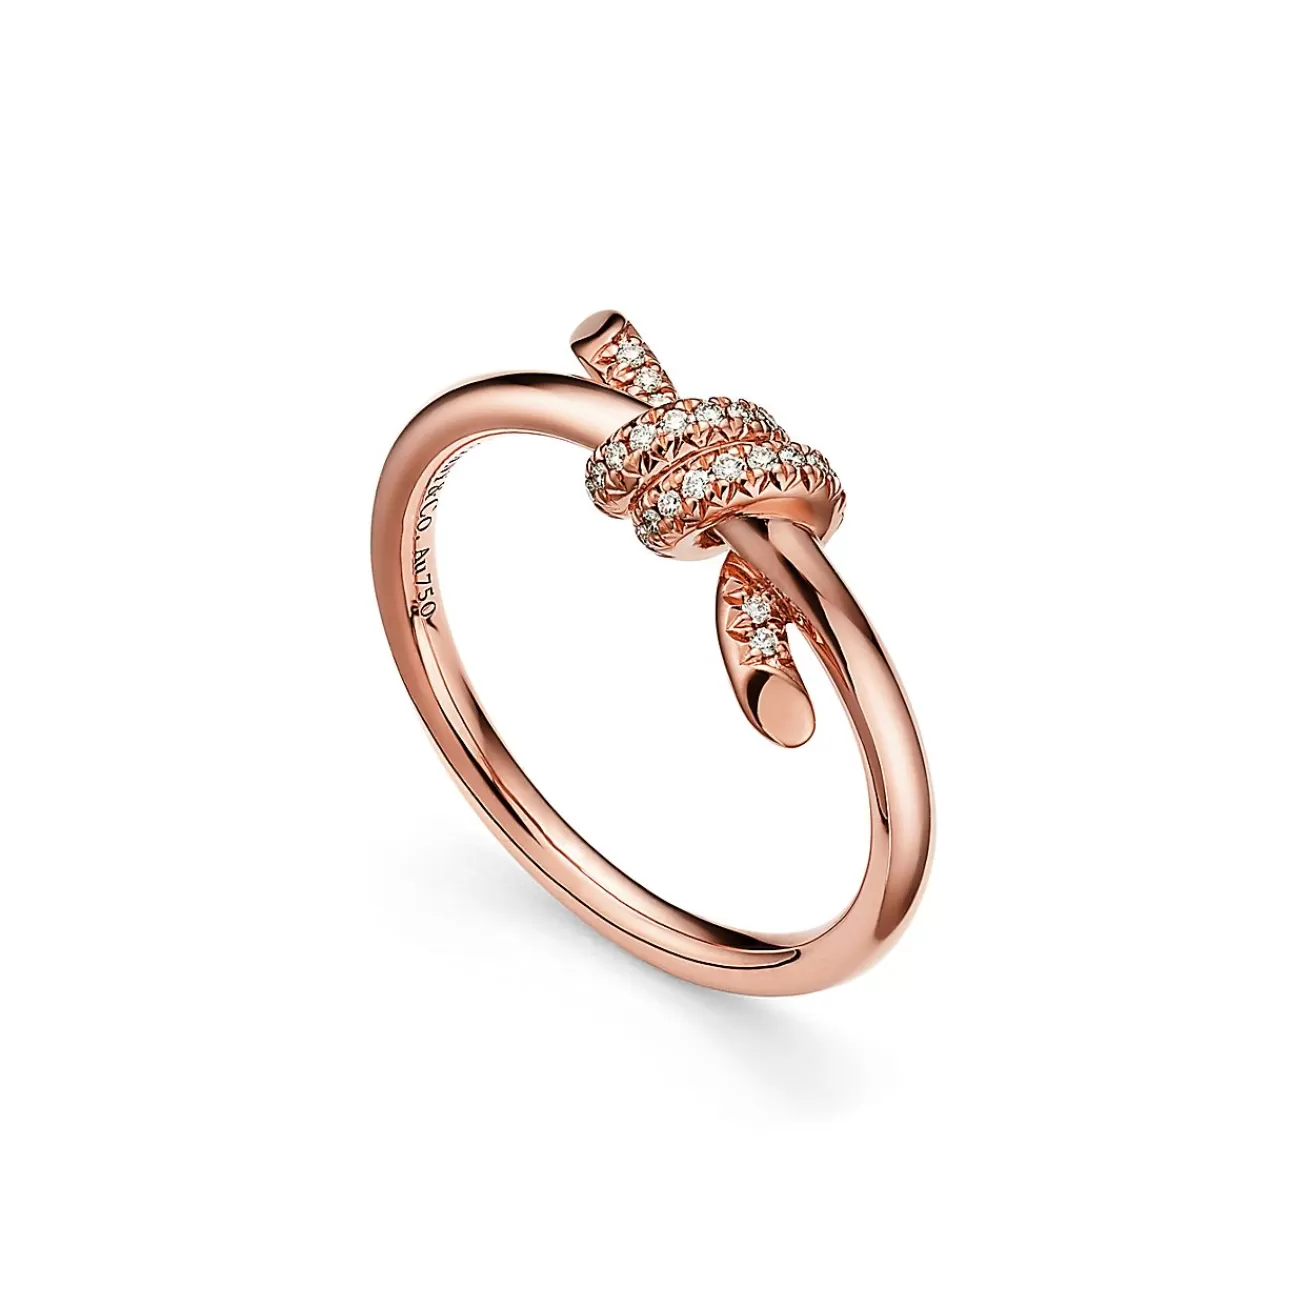 Tiffany & Co. Tiffany Knot Ring in Rose Gold with Diamonds | ^ Rings | Rose Gold Jewelry